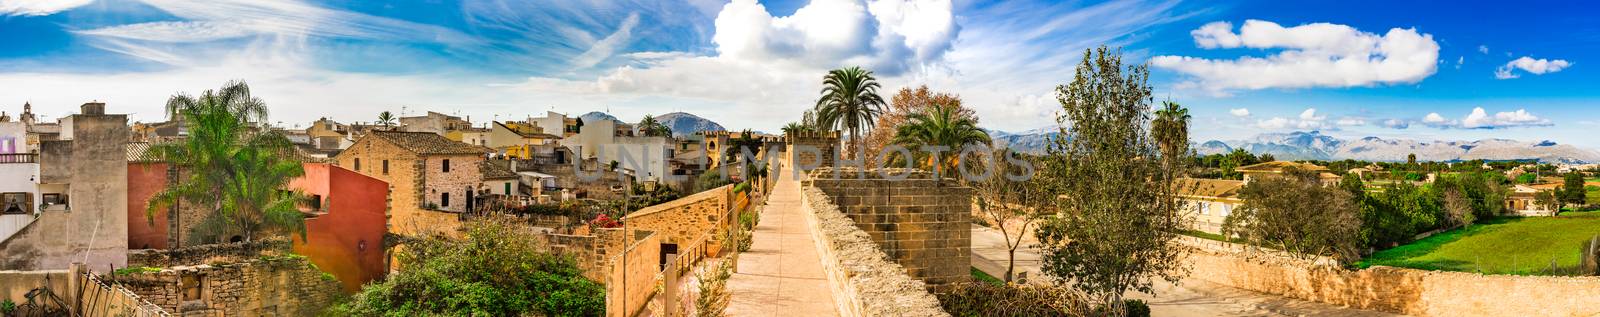 Panorama view of the historic old town Alcudia on Majorca island, Spain